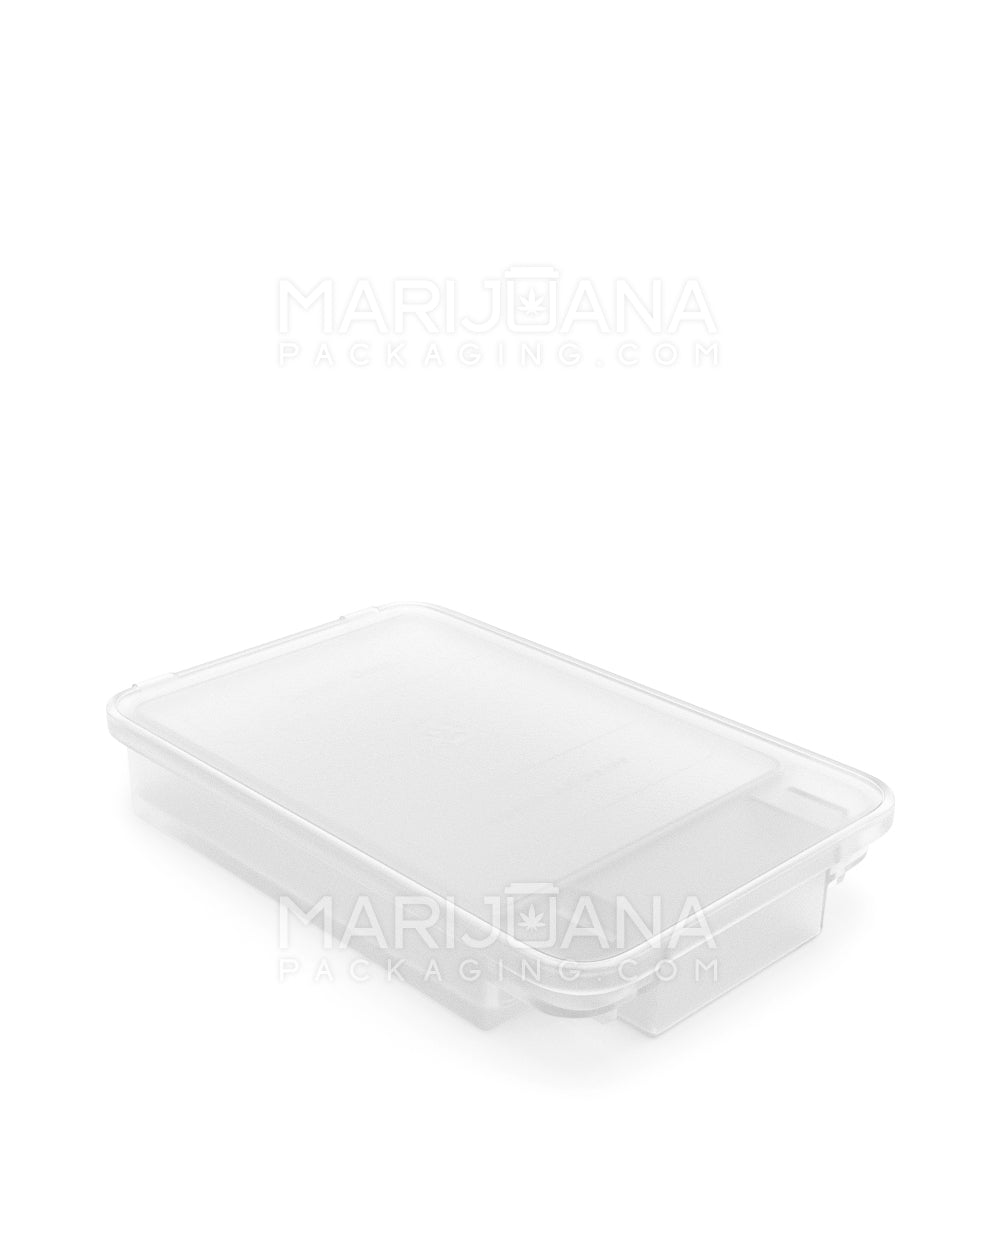 Child Resistant | Snap Box Edible & Pre-Roll Joint Case | Medium - Clear Plastic - 240 Count - 4